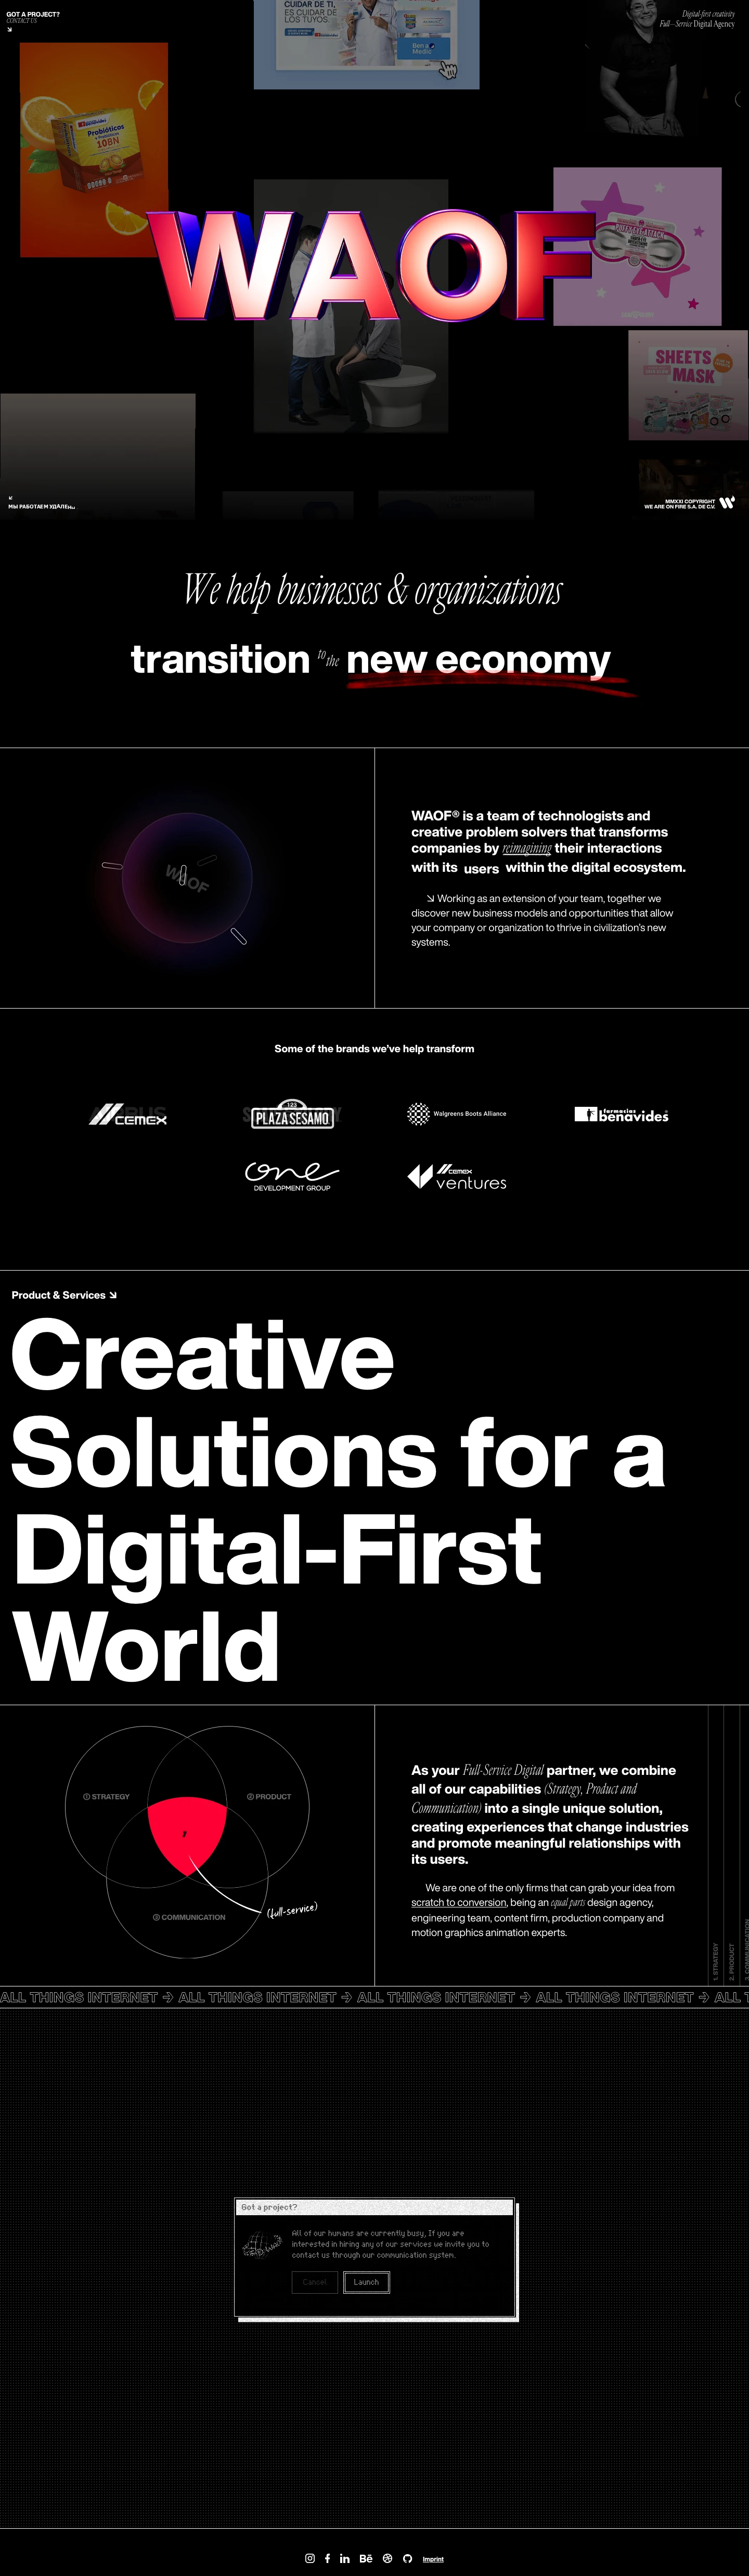 WAOF Landing Page Example: We are a team of technologists that transforms companies by reimagining their interactions with its customers within the digital ecosystem.